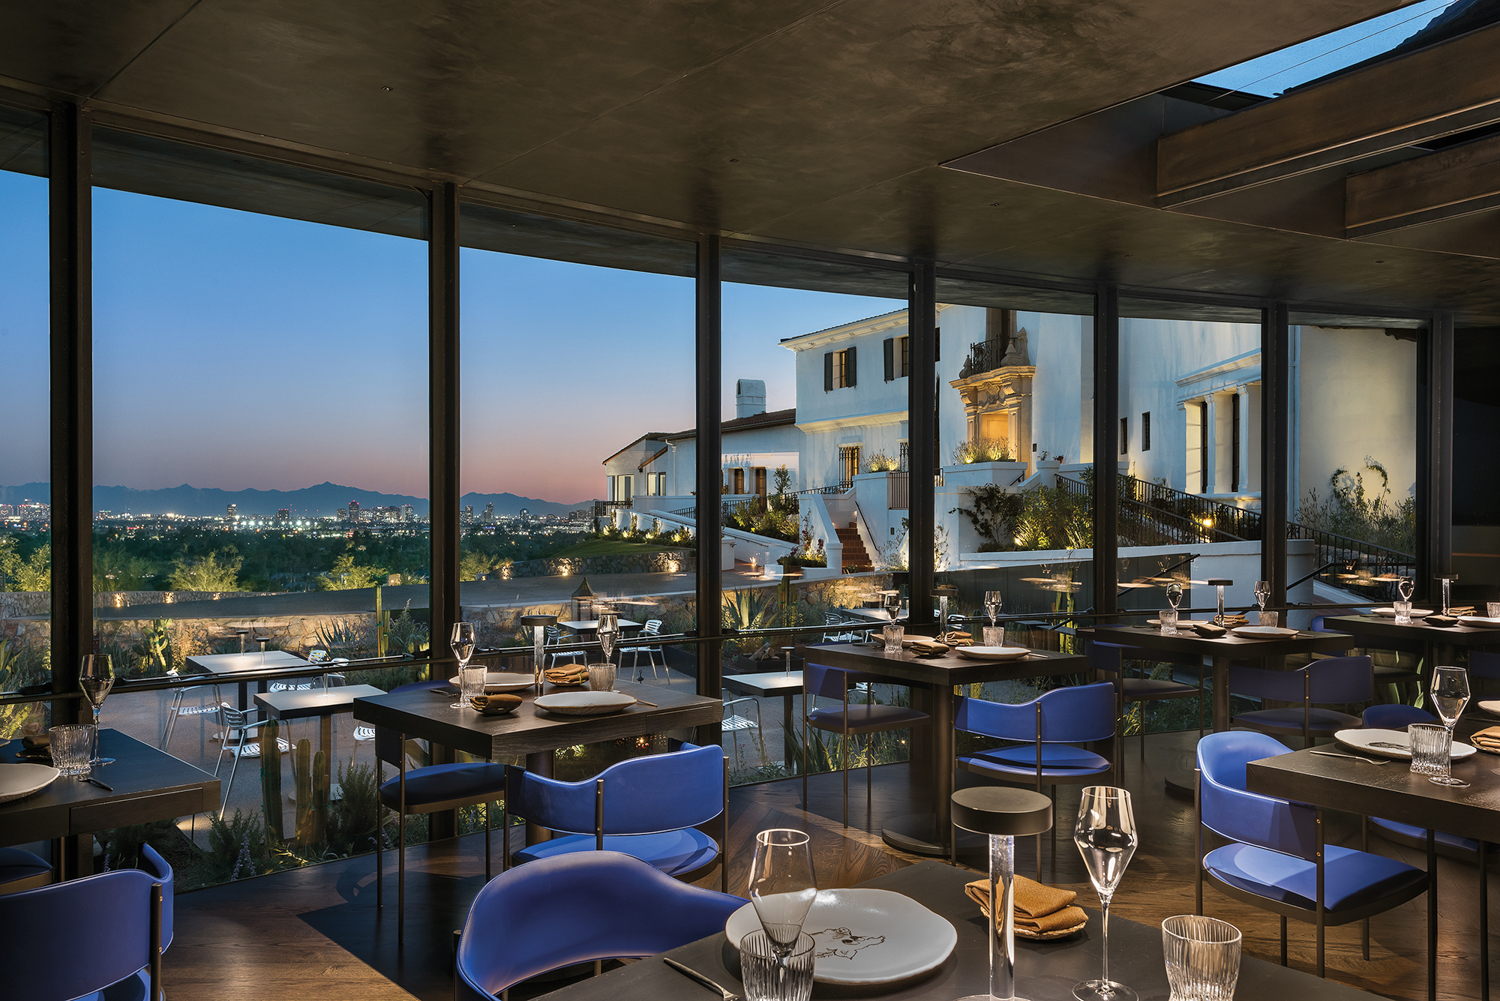 Restaurant with blue chairs overlooking city views.